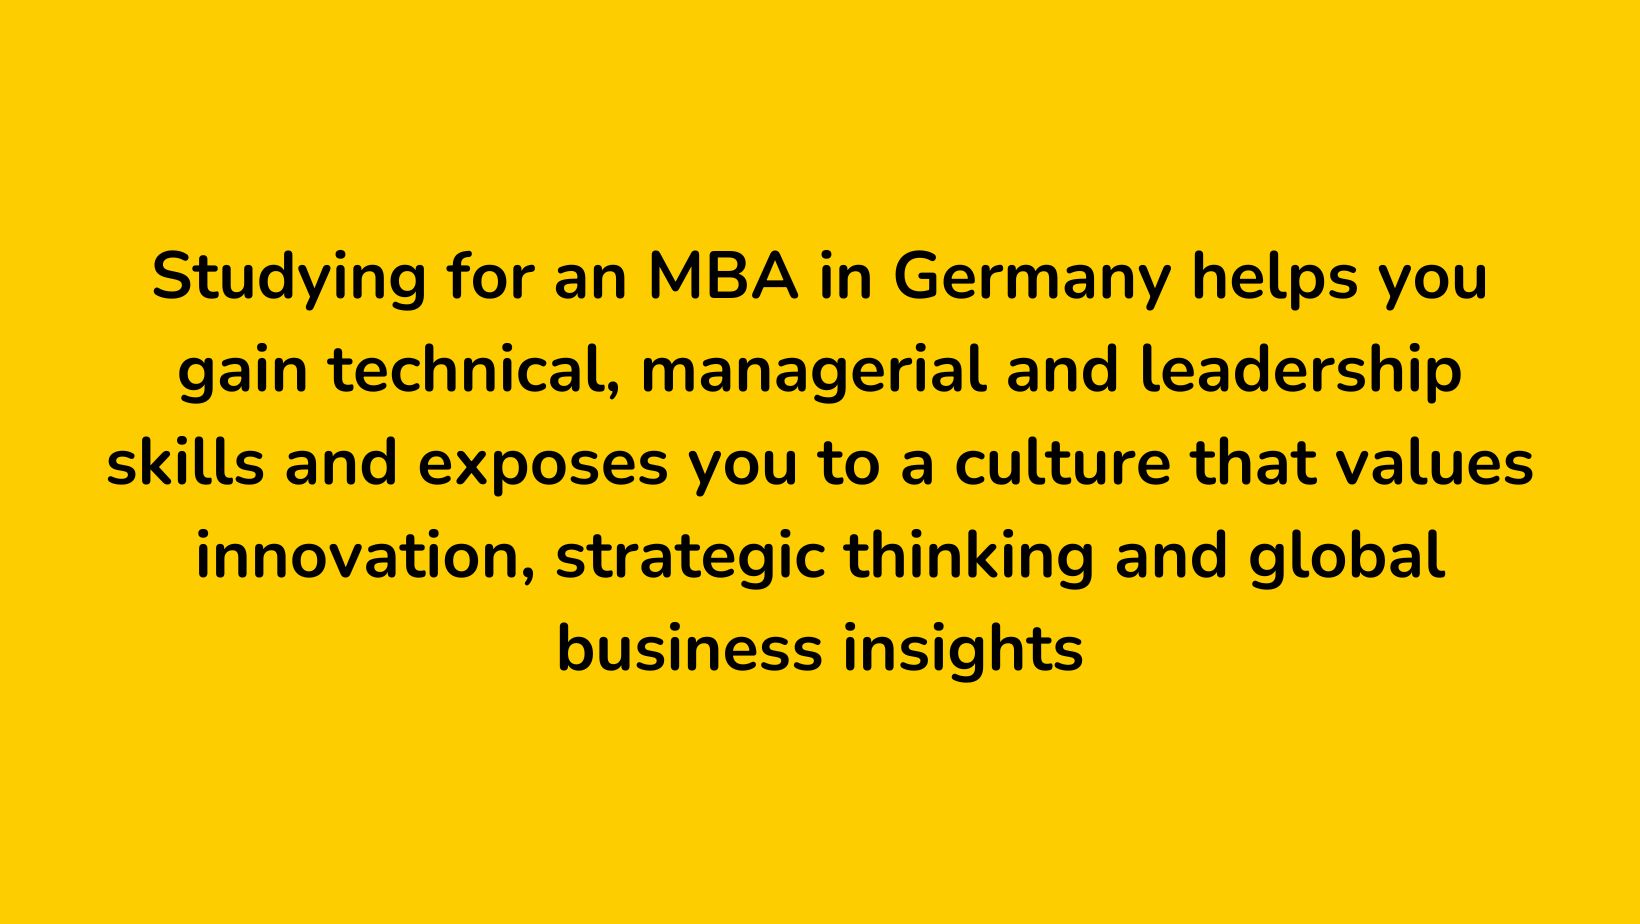 MBA From Germany - KCR CONSULTANTS - Learning experience in Germany